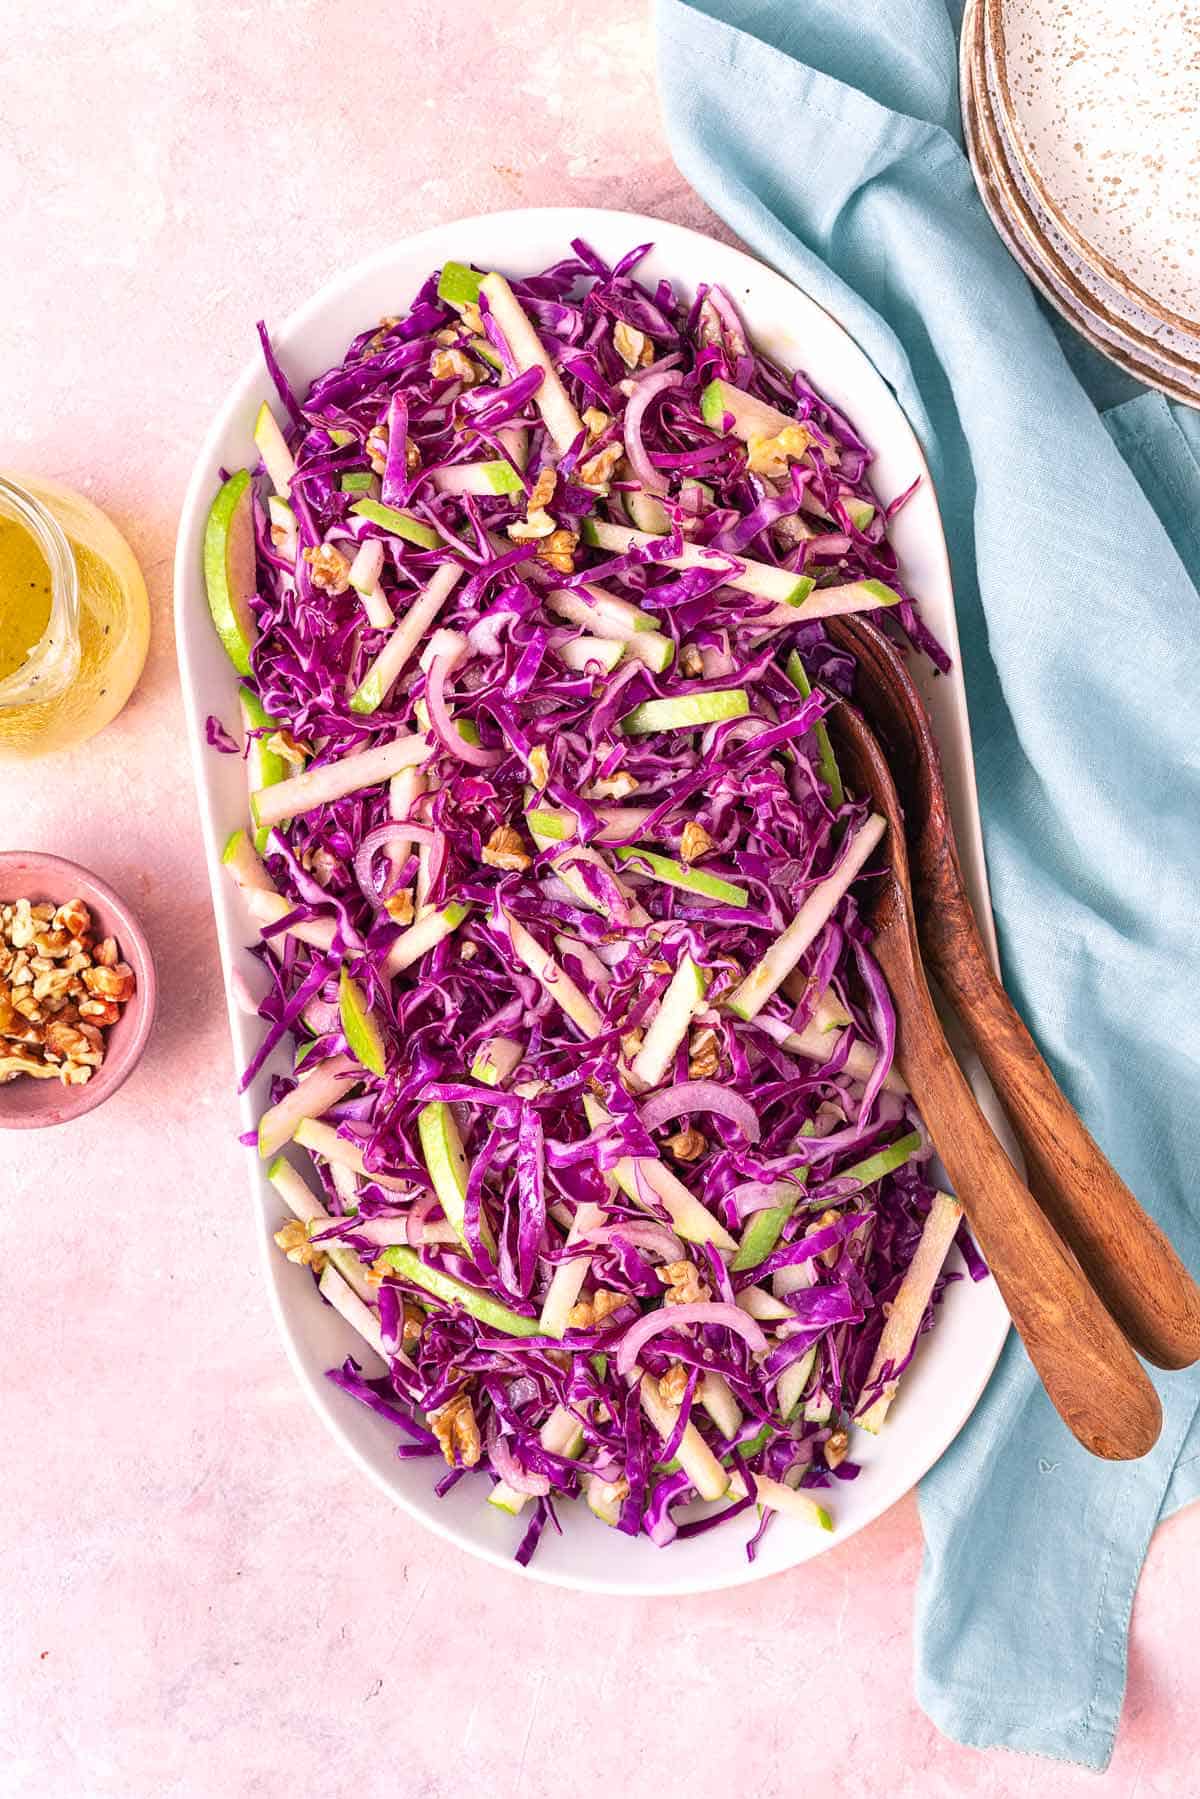 red cabbage salad in a large serving bowl with wooden serving utensils.